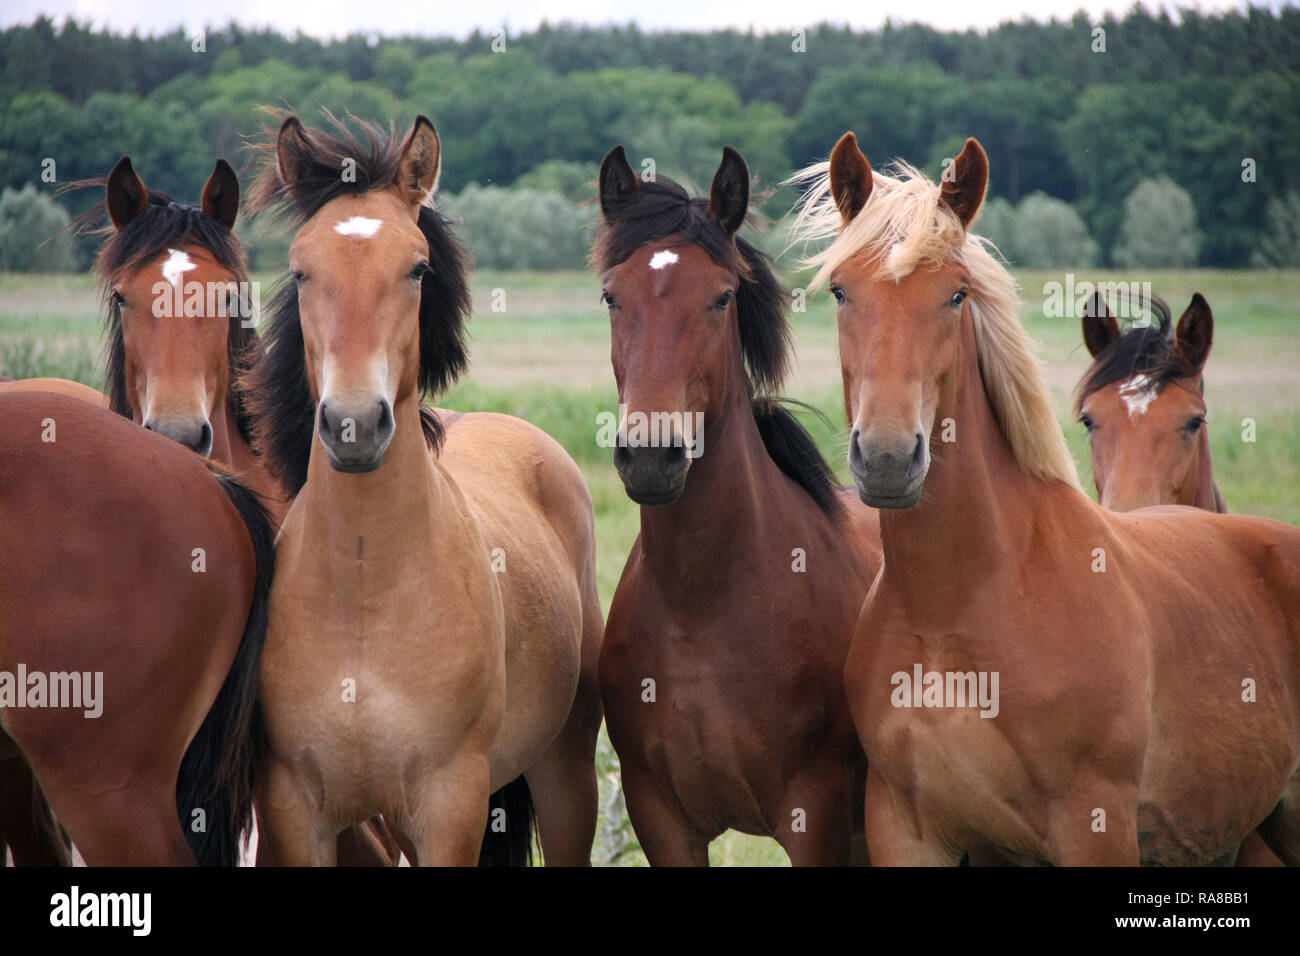 Free running wild horses on a meadow. Country midlands landscape with group of animals. Stock Photo